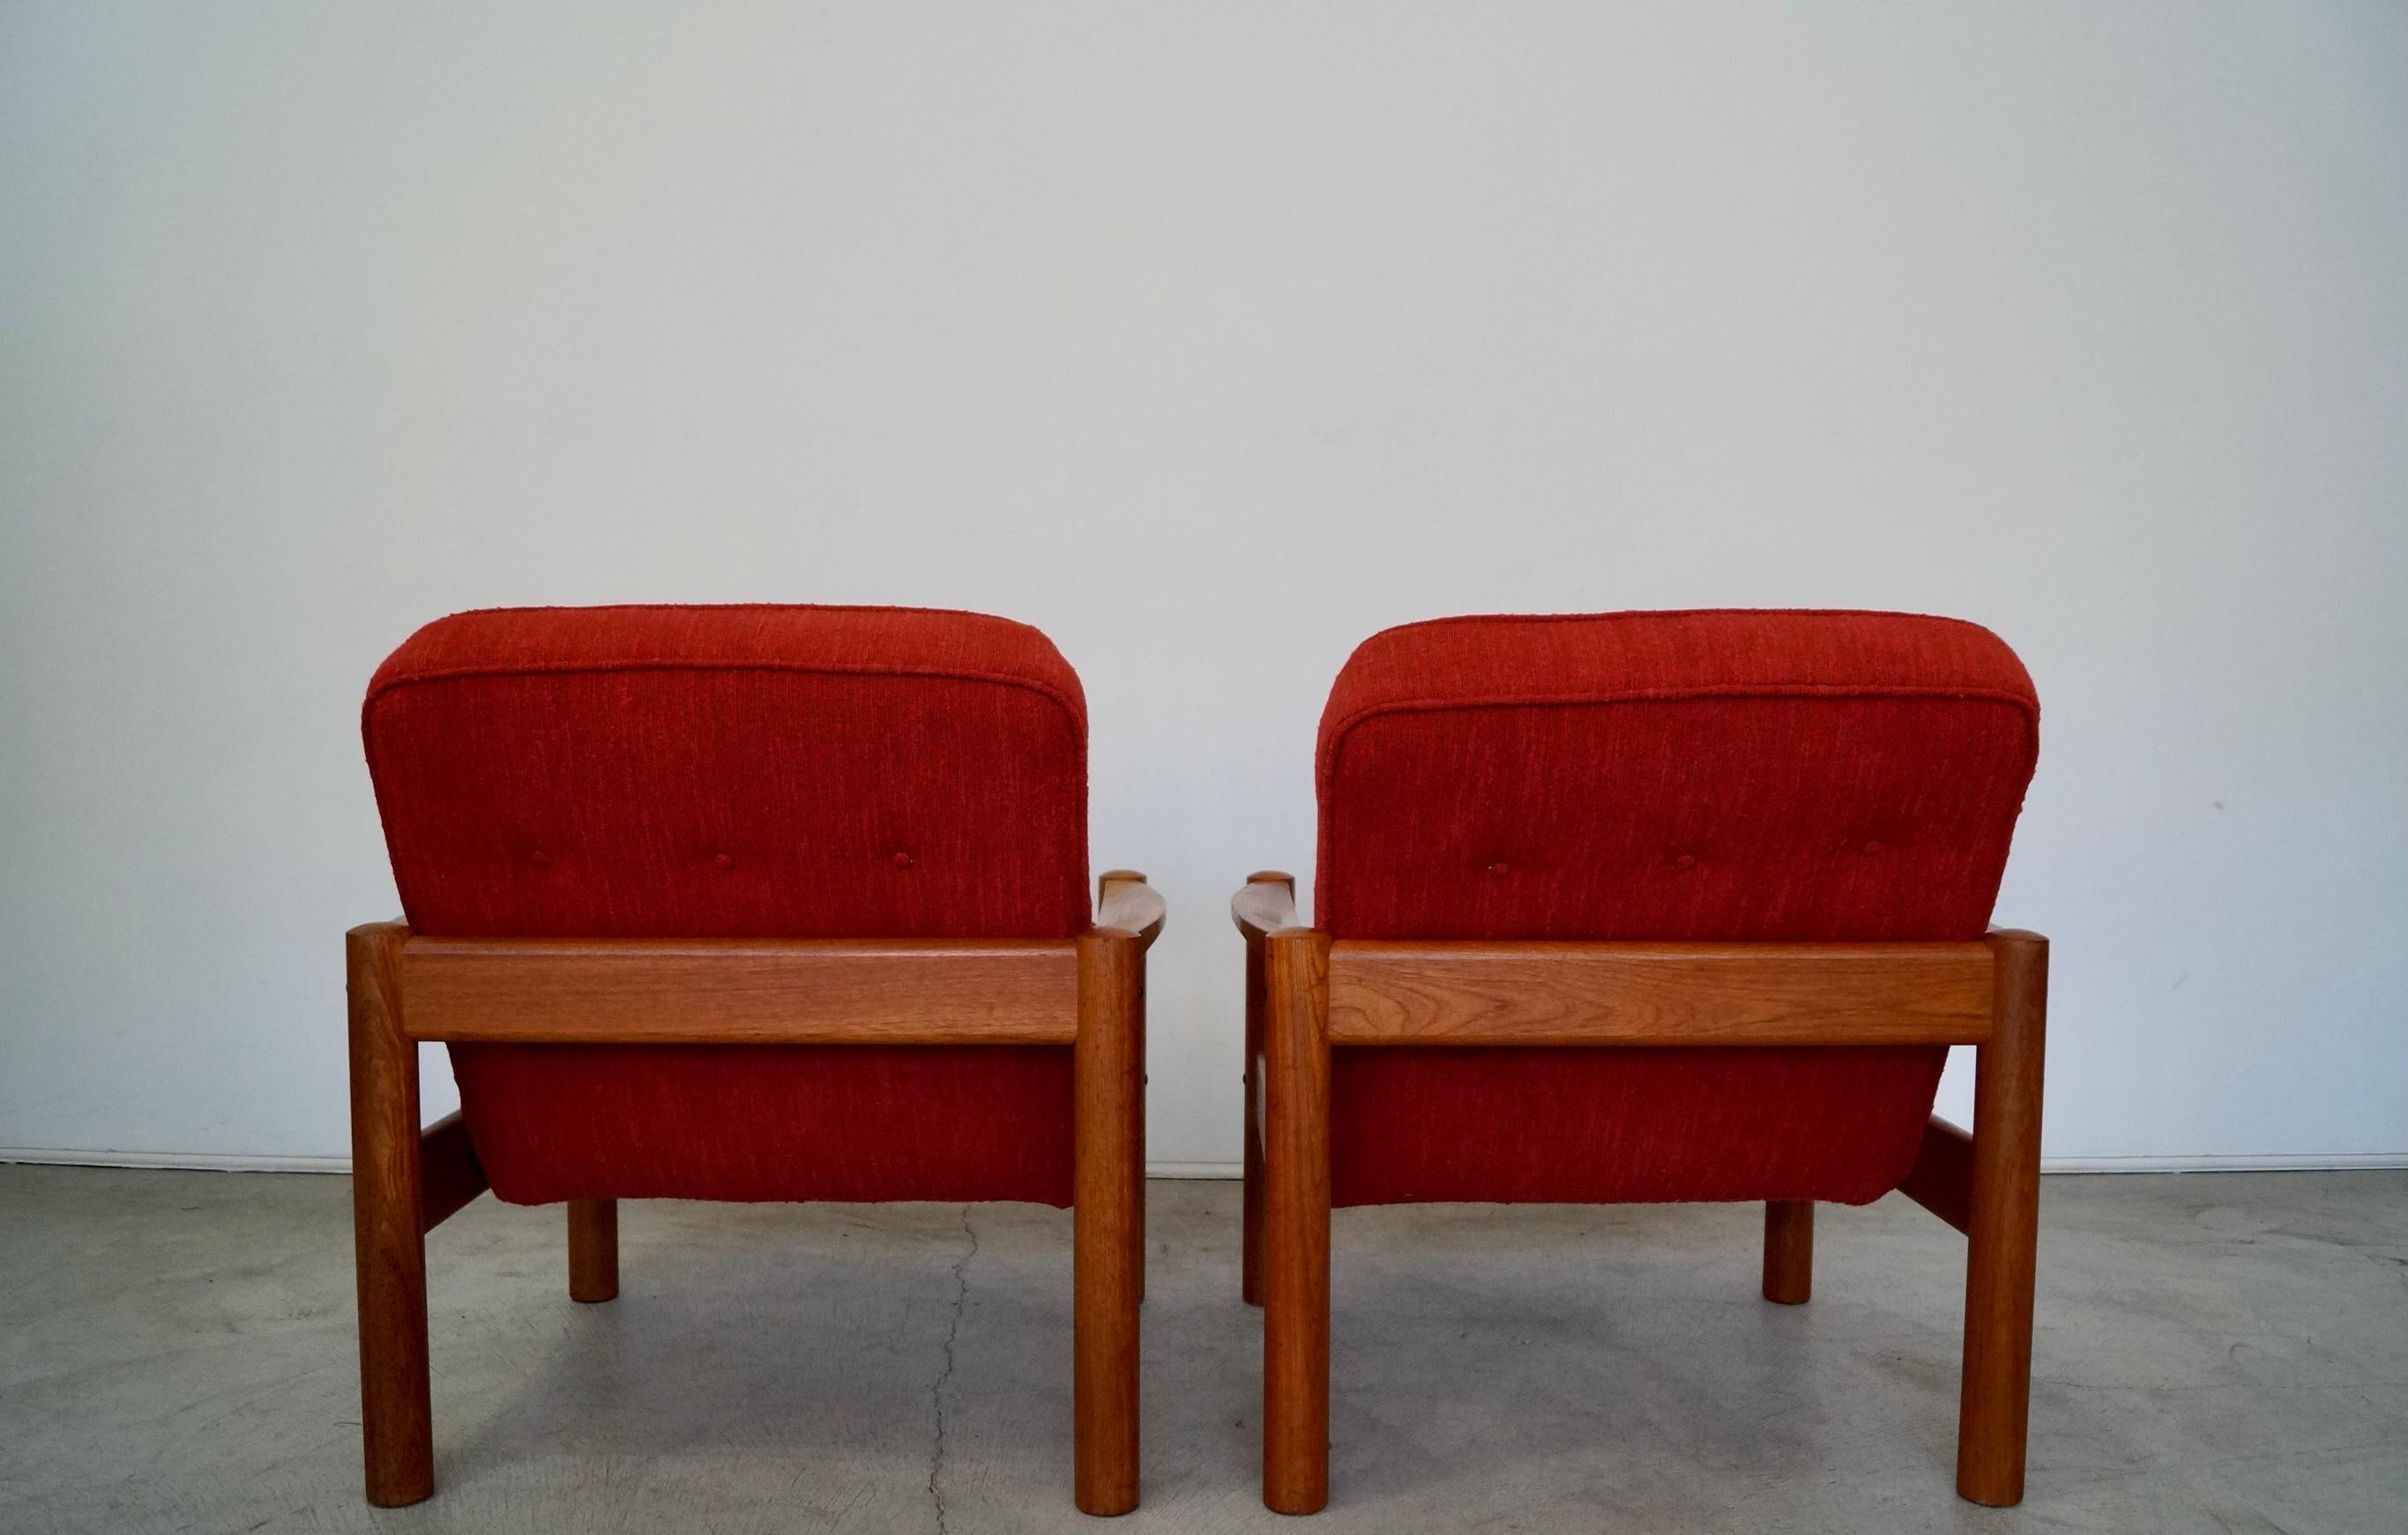 1970's Danish Modern Teak Lounge Chairs by Domino Mobler - a Pair For Sale 3